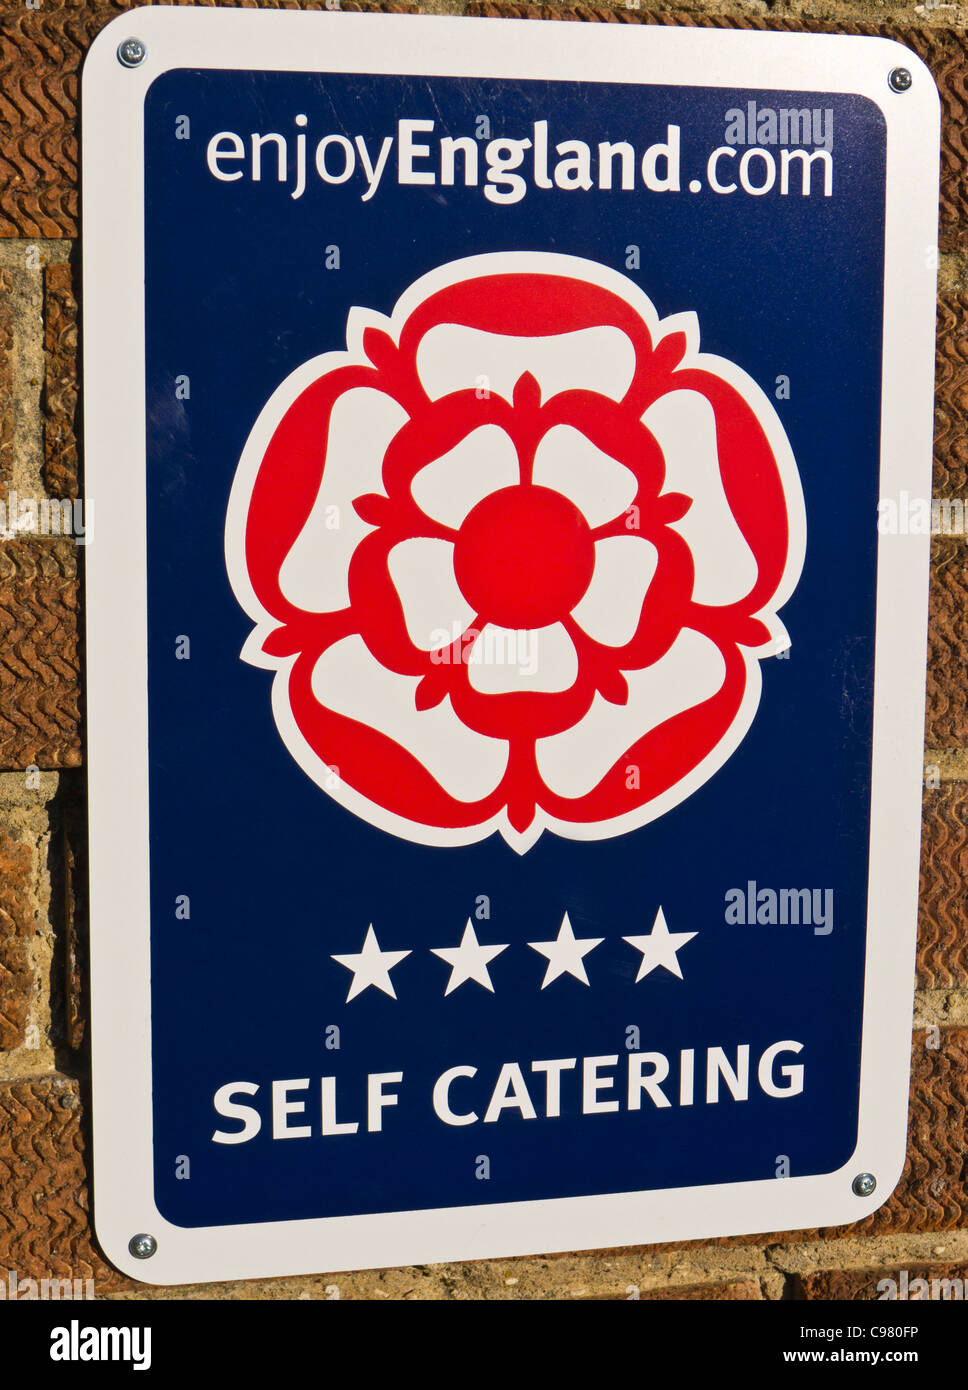 Enjoy England four star self catering sign. Stock Photo